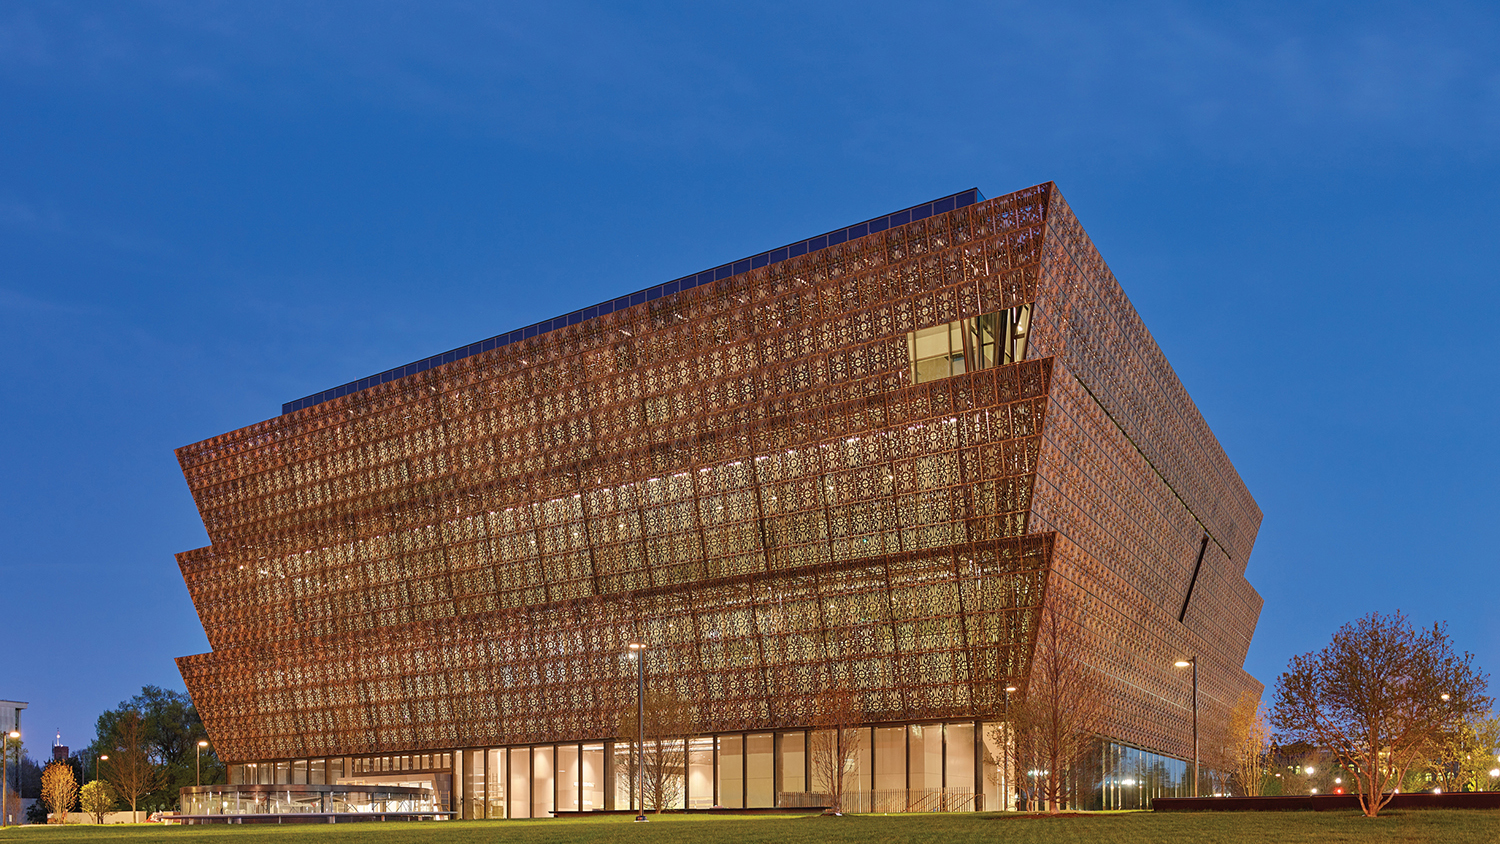 David Adjaye on The National Museum of African American History and Culture